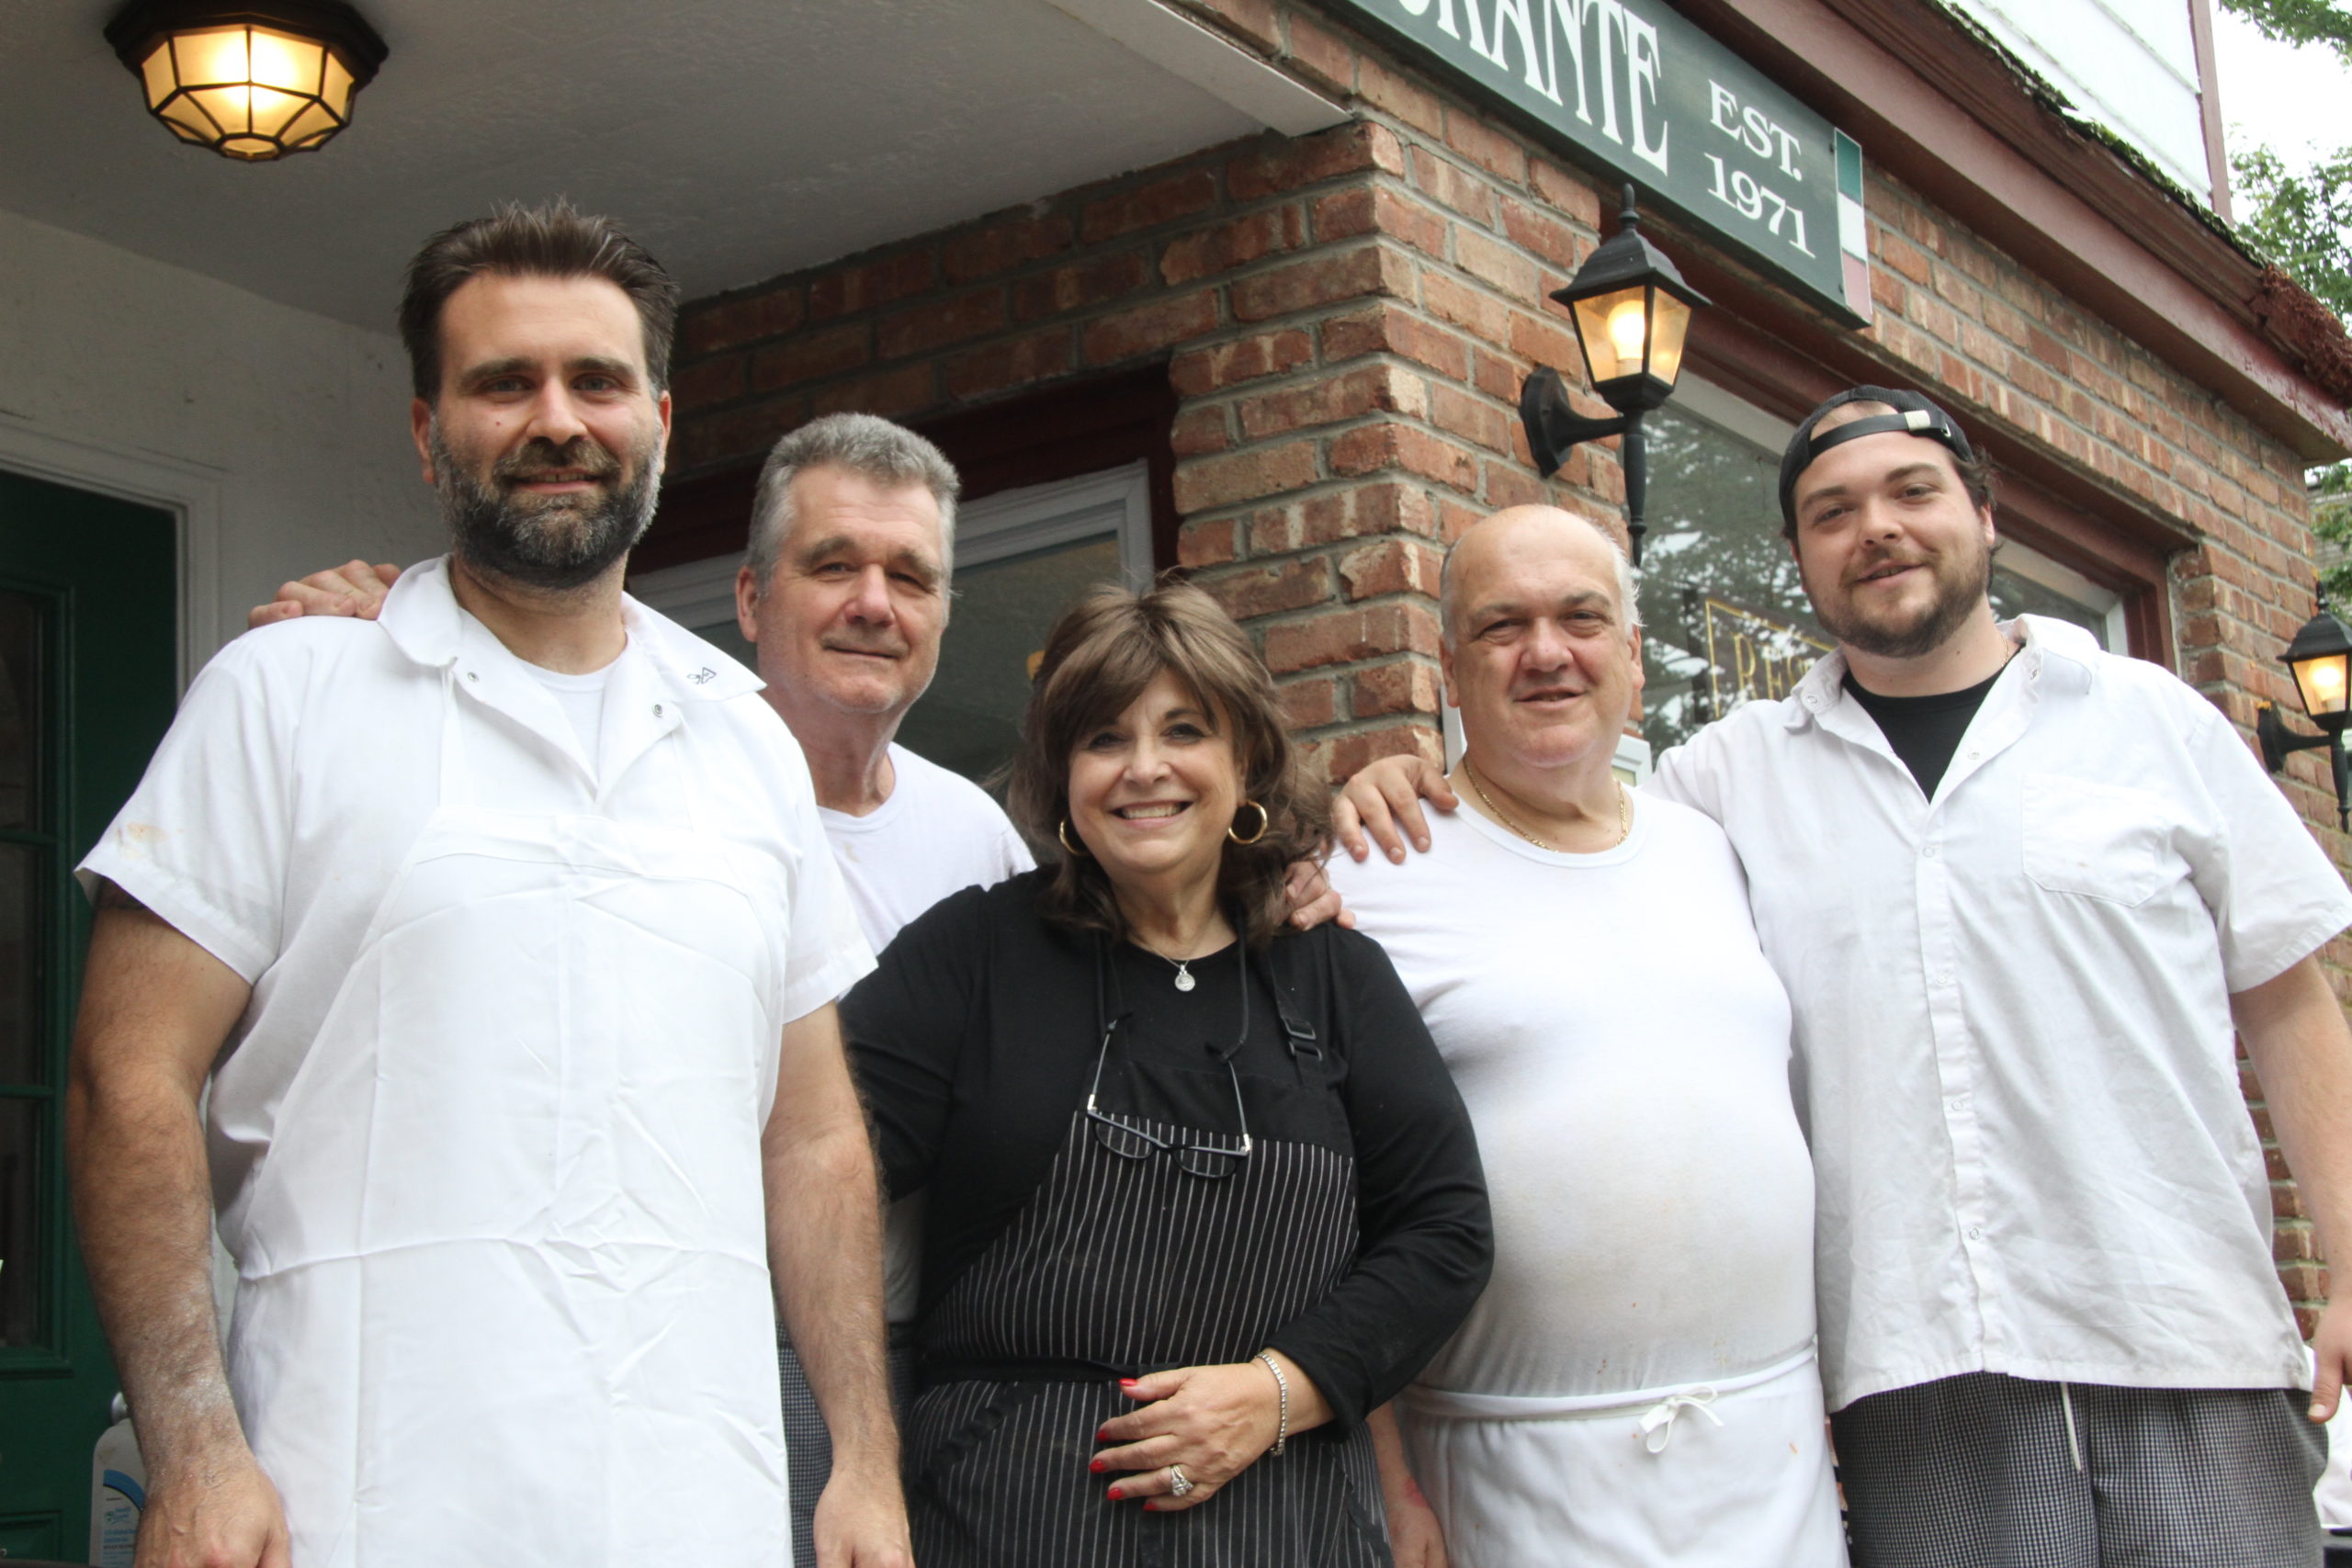 Anthony, Nado and Alda Stipanov, left, and Tony and Joe Lupo, have sold Astro's Pizza and Felice's Ristorante in Amagansett after 50 years in business. The new owners are expected to continue selling pizza and adding an ice cream parlor.